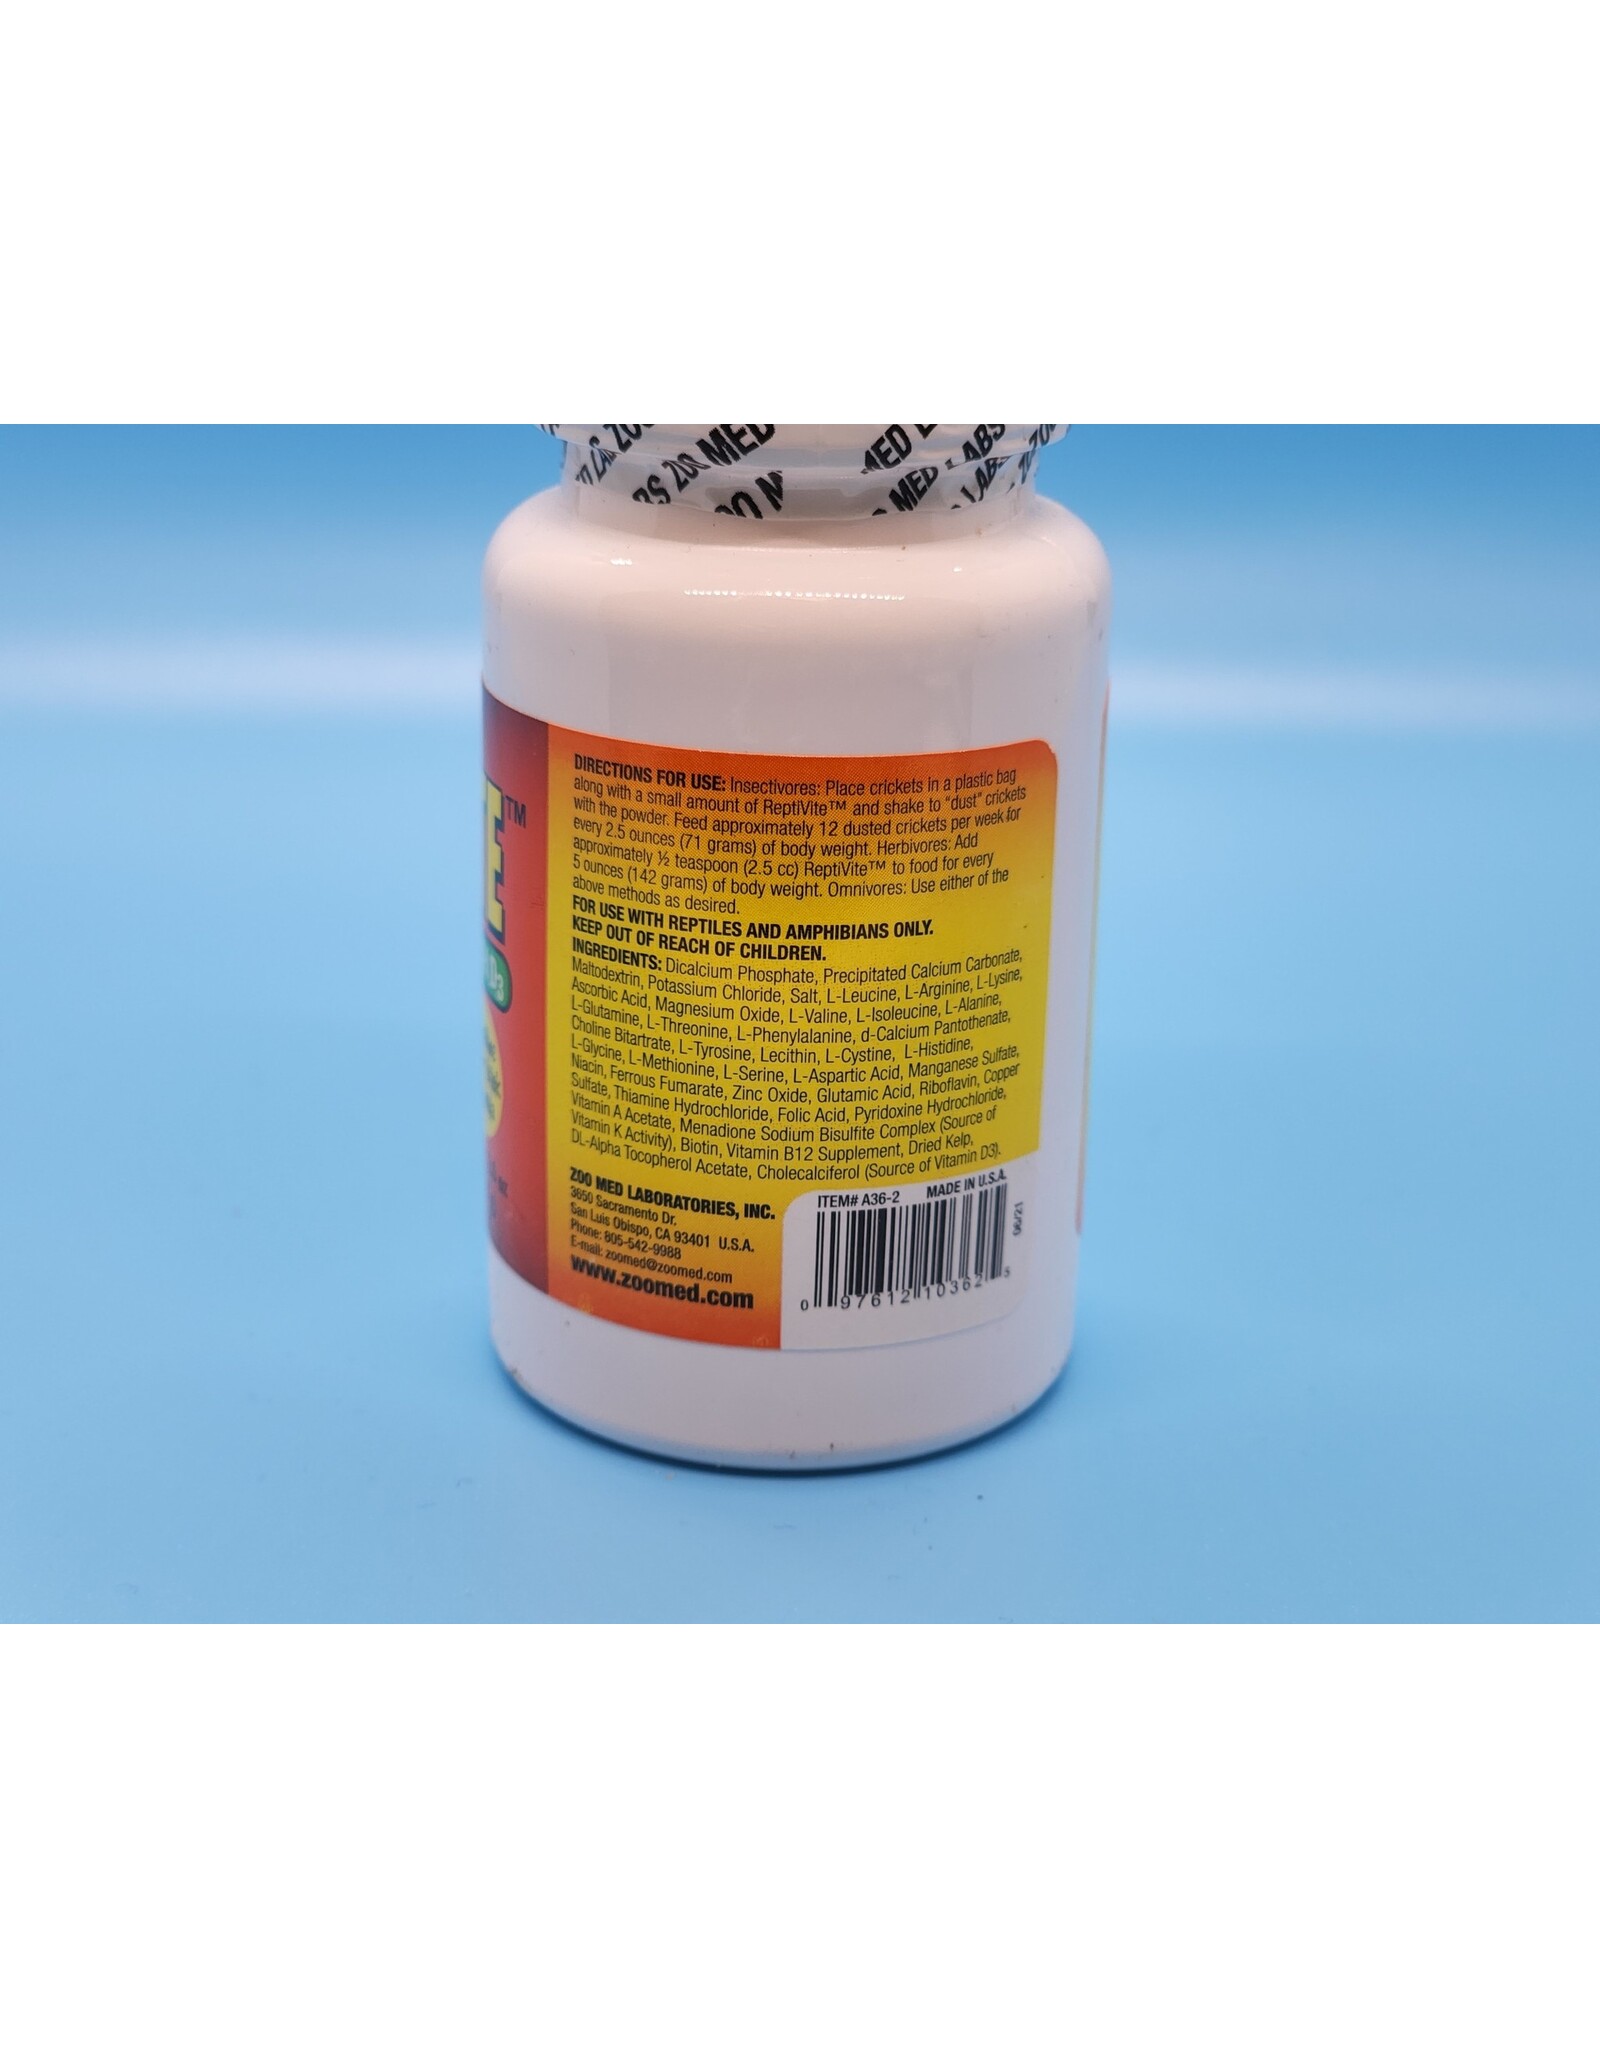 Zoo Med Reptivite with D3 2 oz ZM ( UPC 3625 )